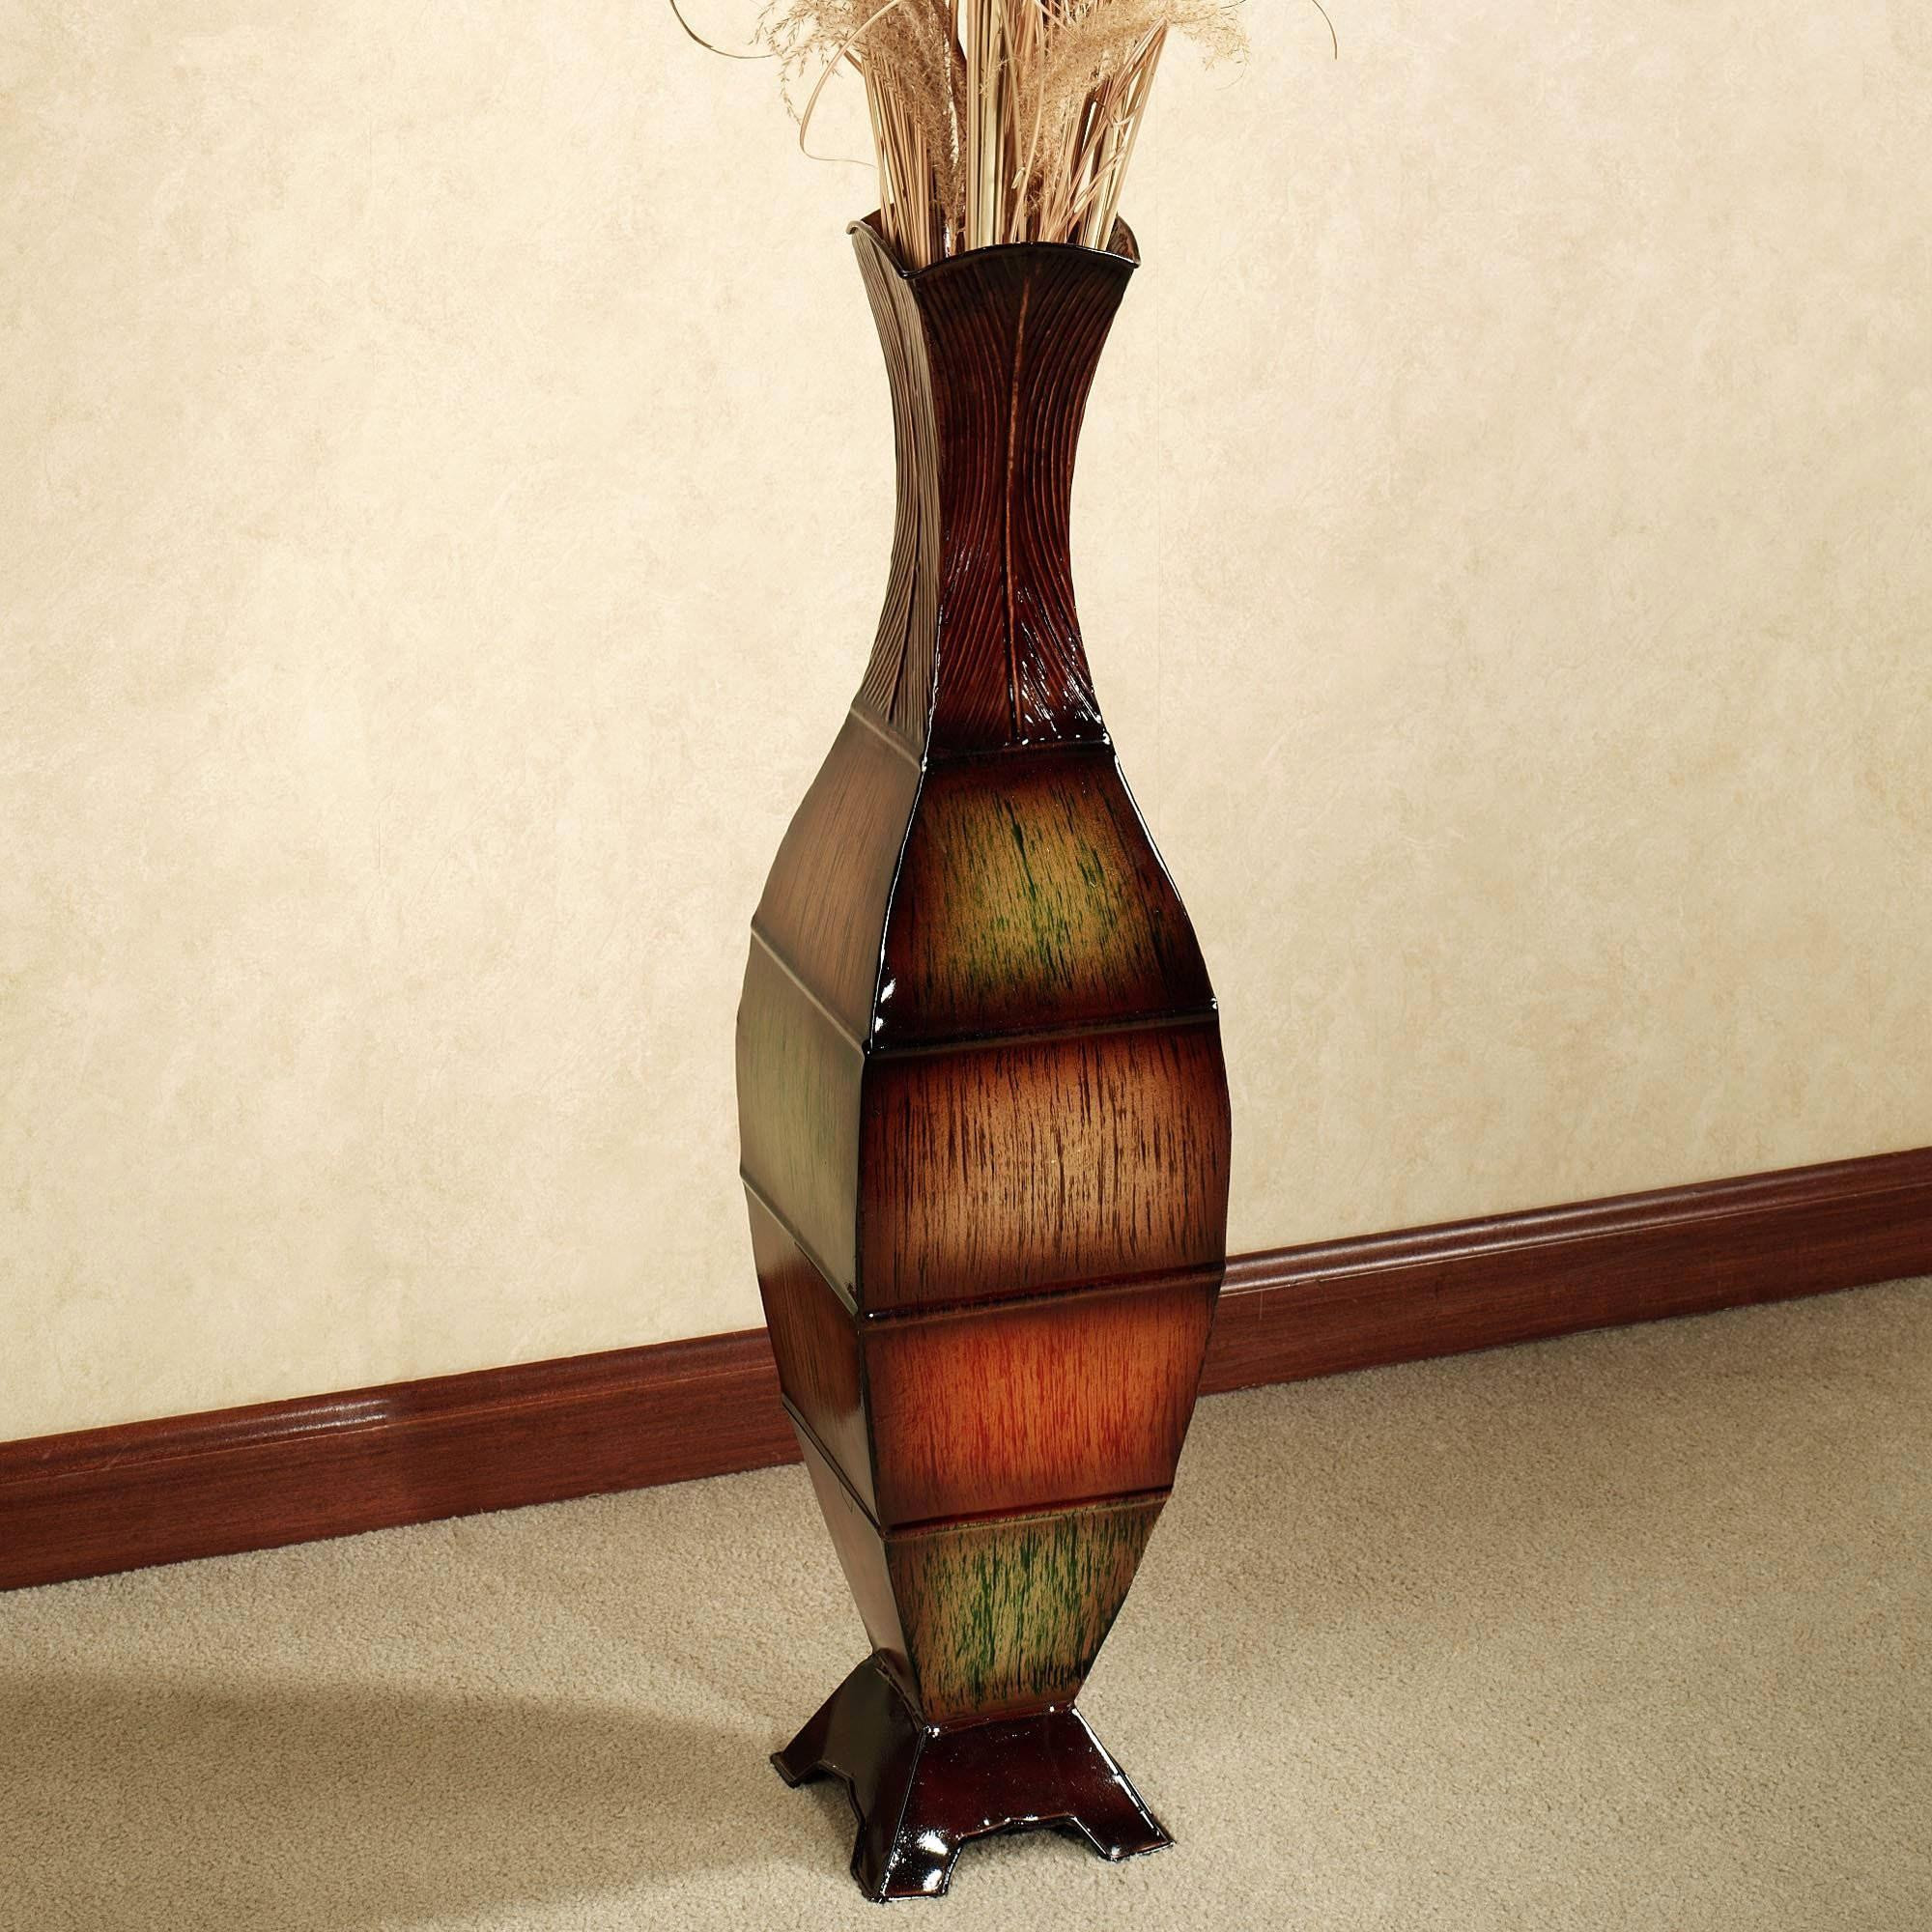 22 attractive Tall Clear Vases 2024 free download tall clear vases of living room vases wholesale new h vases big tall i 0d for cheap also intended for living room vases wholesale new h vases big tall i 0d for cheap also design of